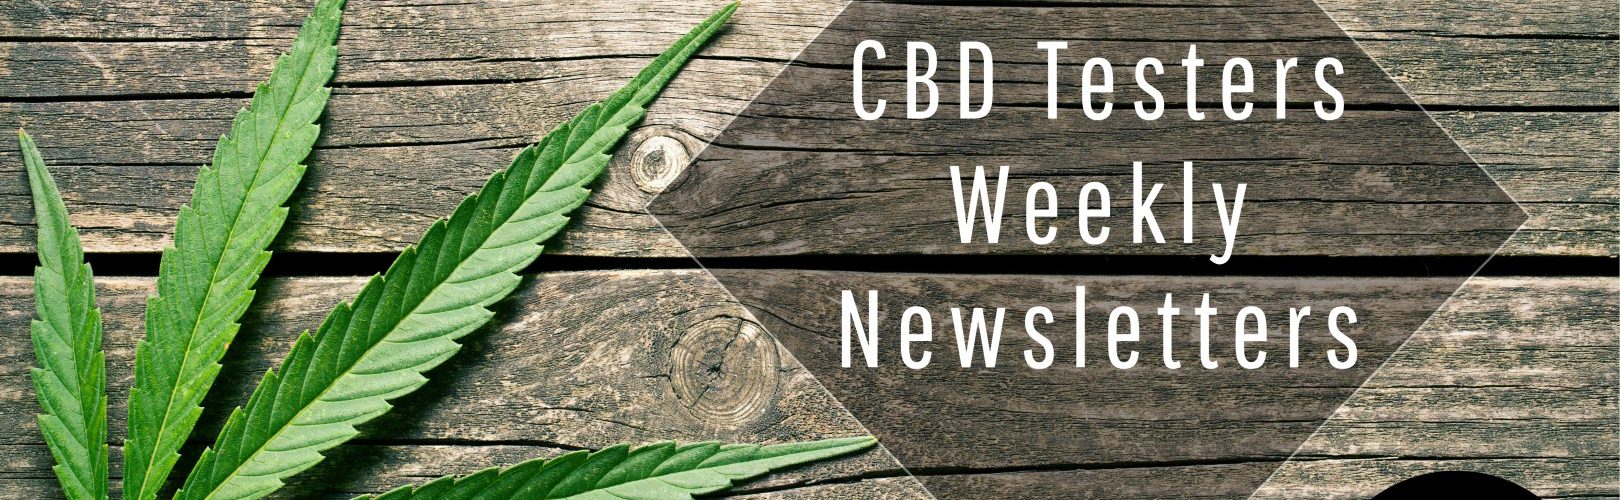 CBD Testers Weekly Newsletters